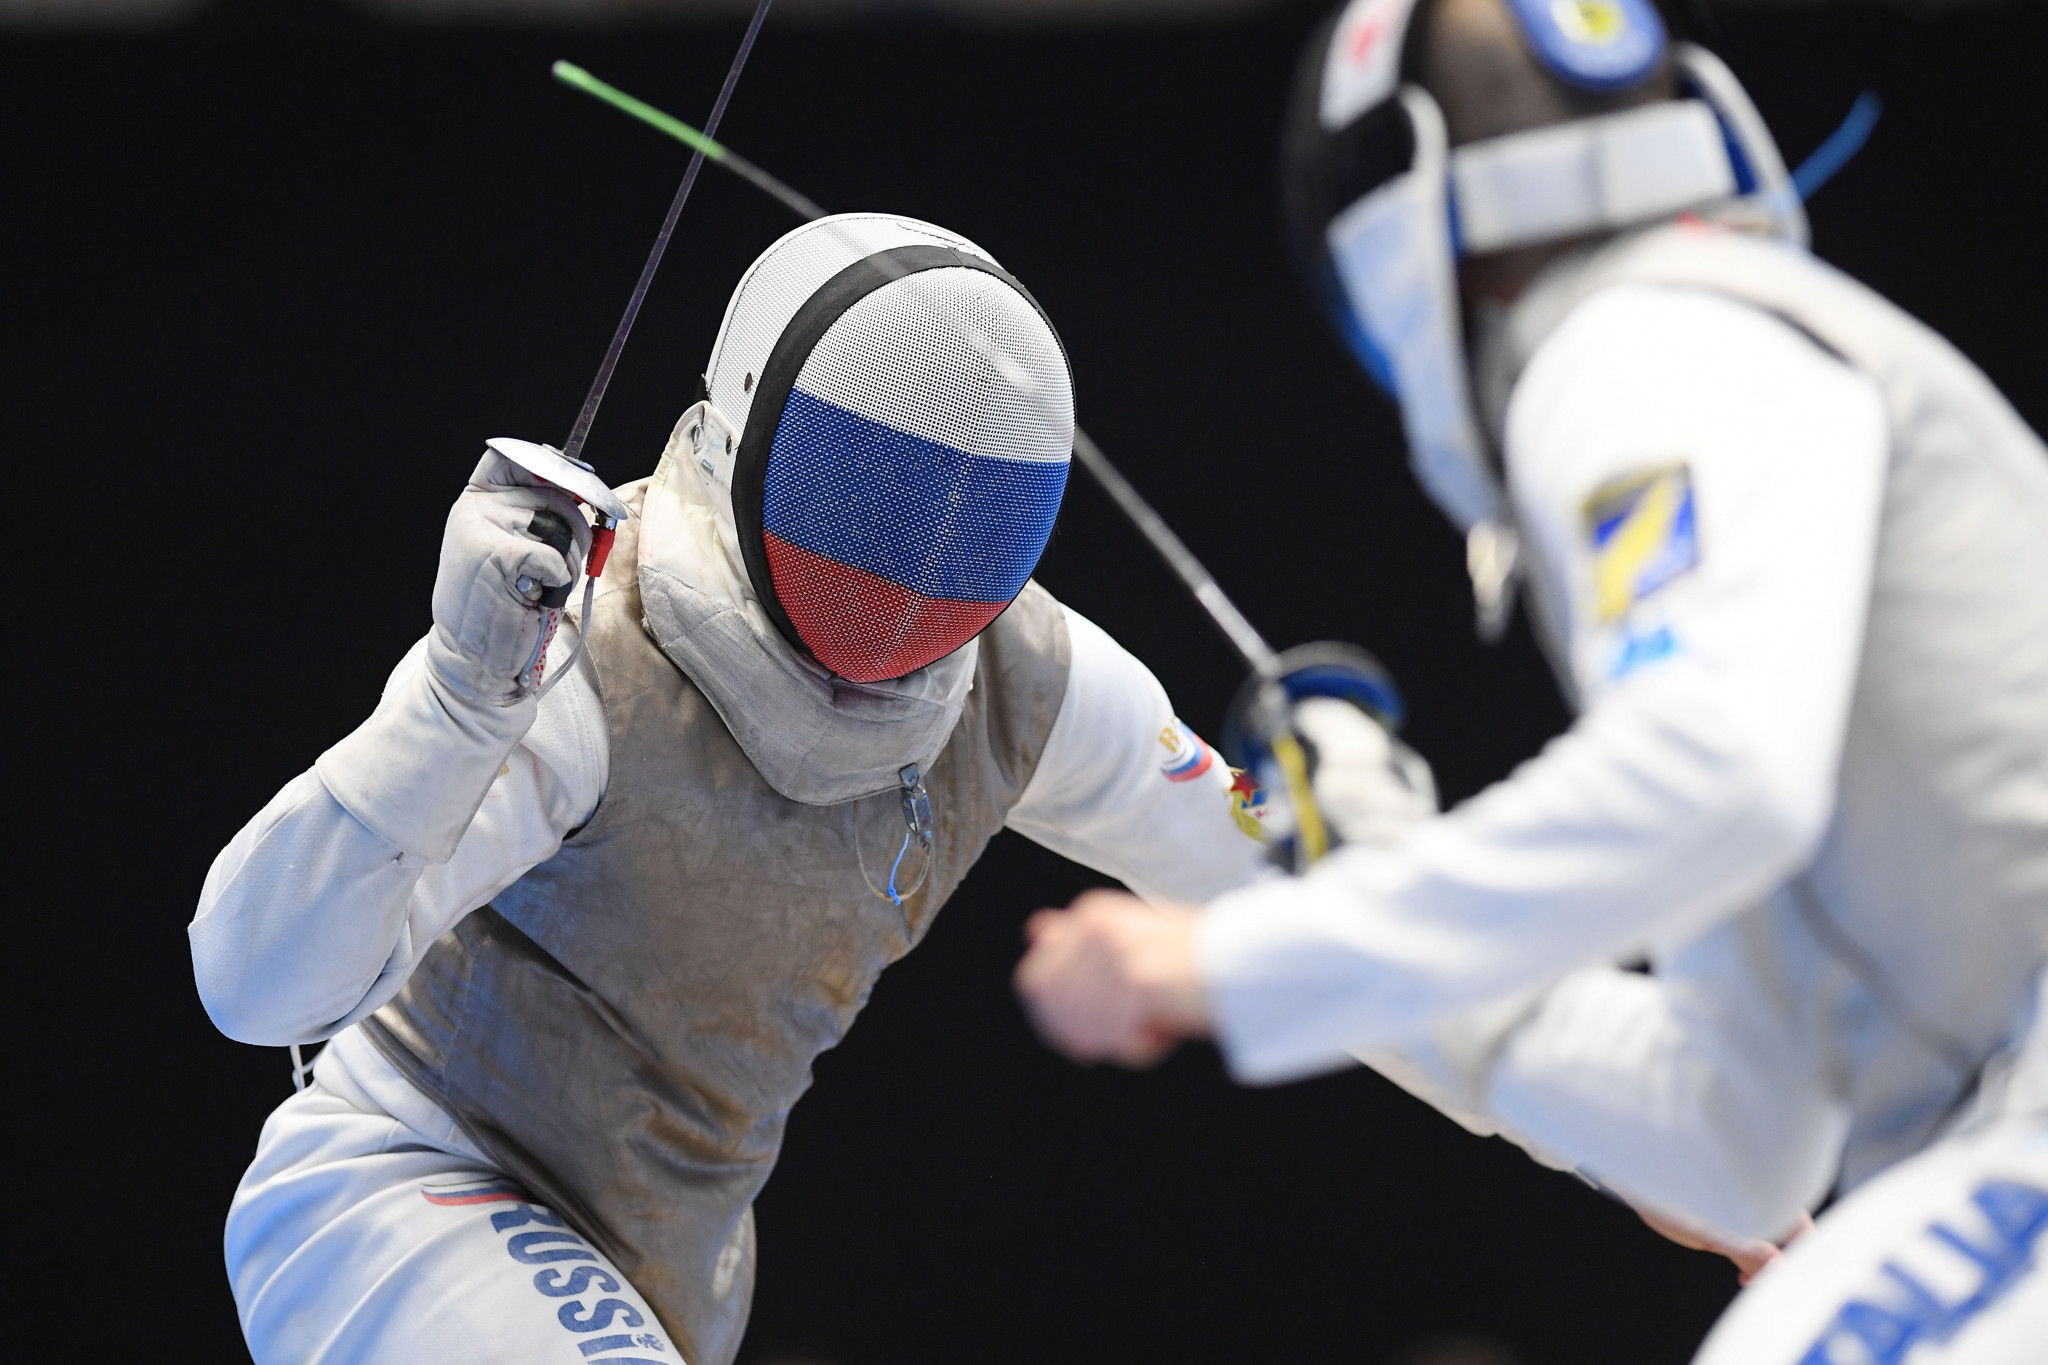 Ukraine 'shocked' as Russian fencers cleared to compete